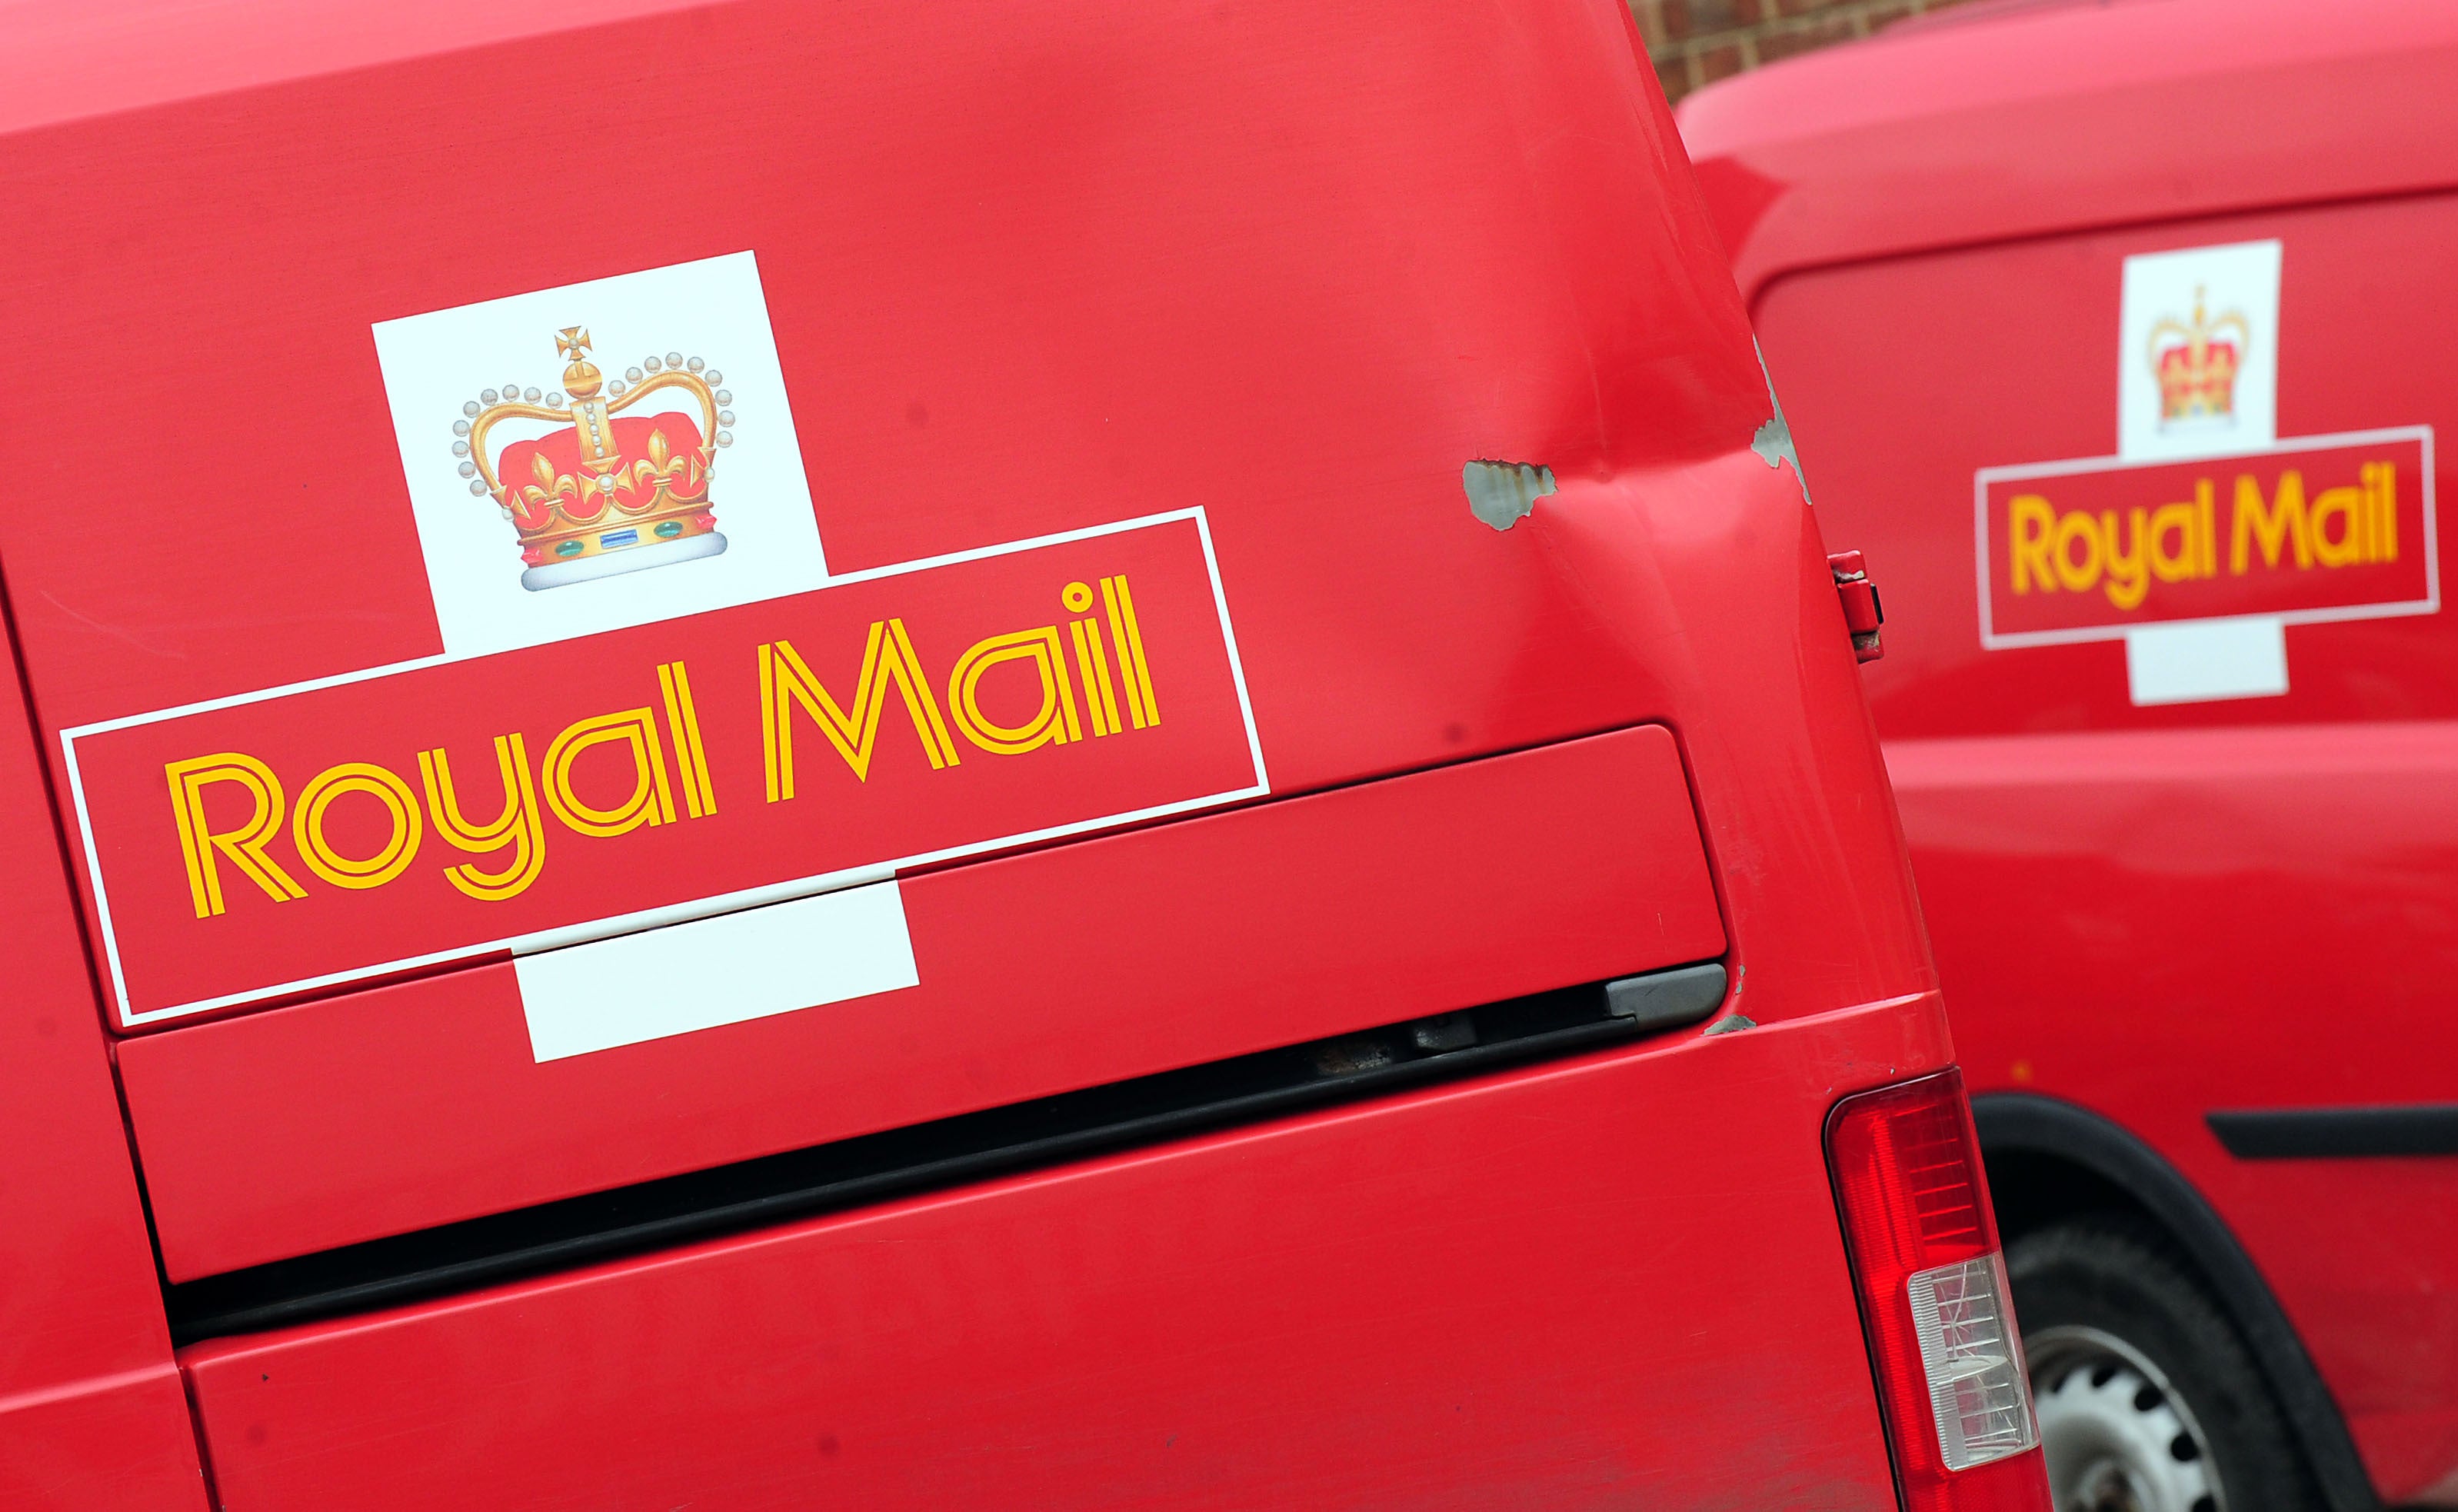 Britons can expect disruption to postal services during the strike action